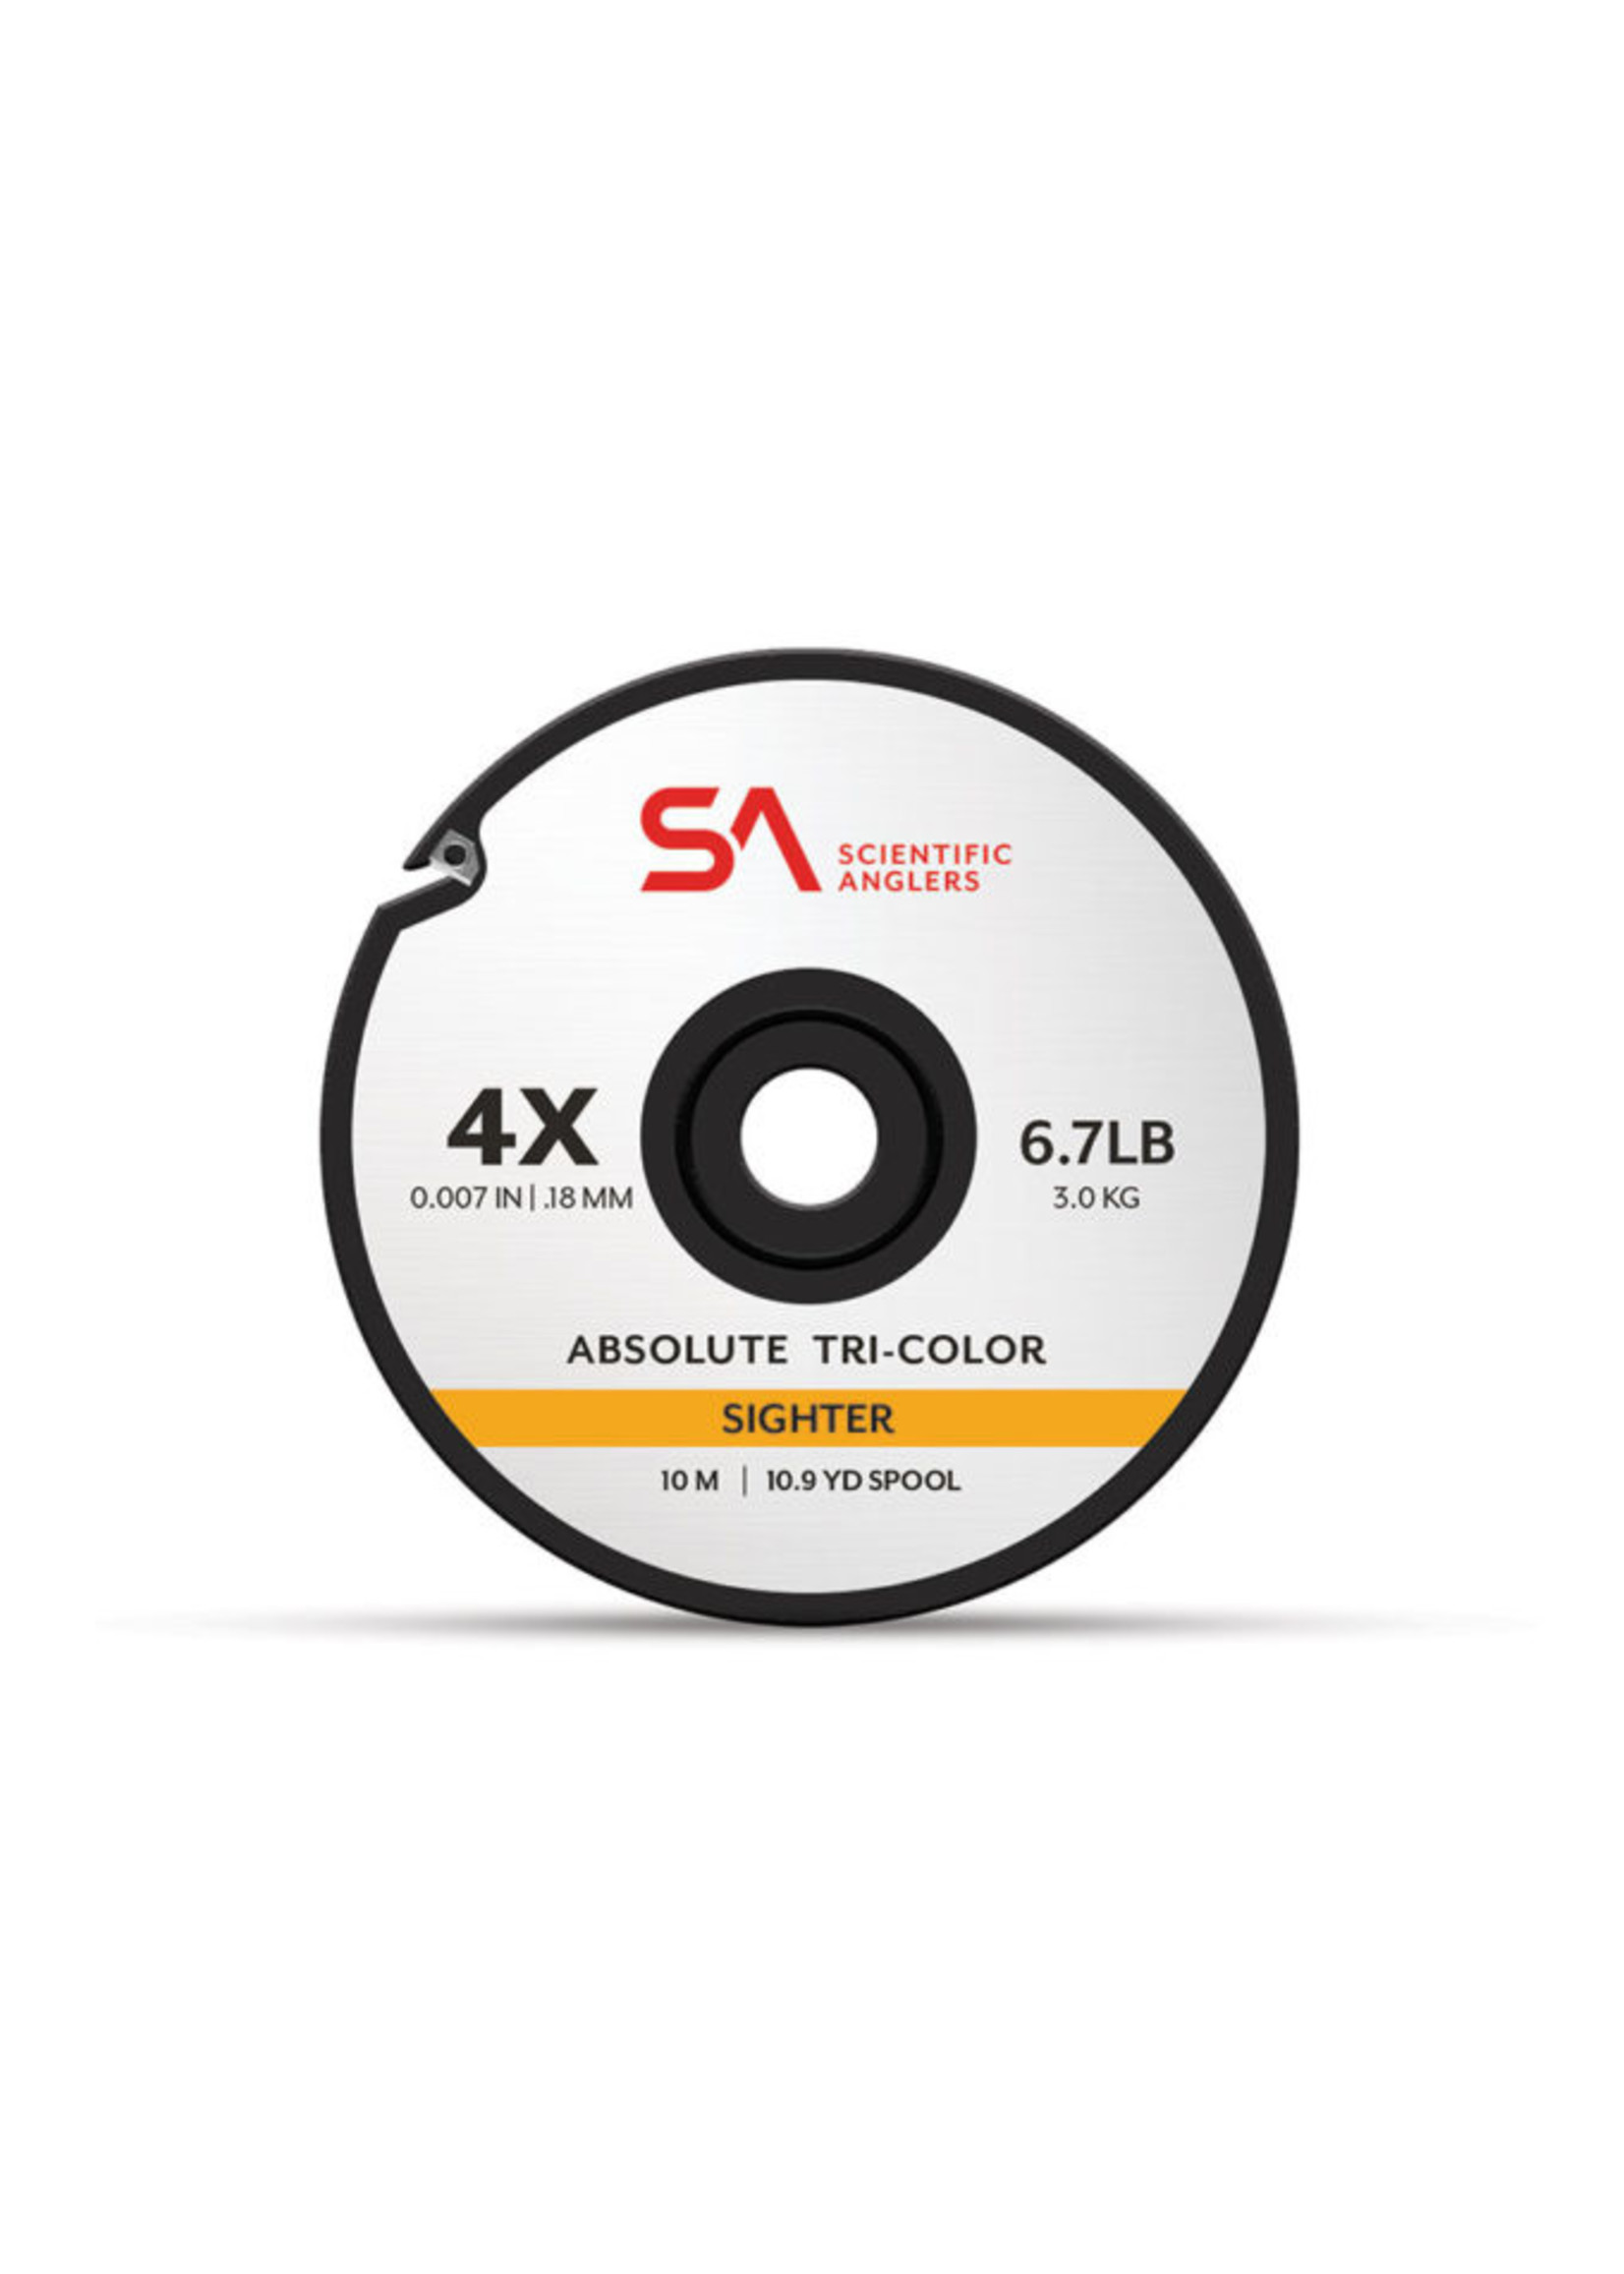 Scientific Anglers Scientific Anglers Absolute Tri-Color Sighter Tippet 2x 10m